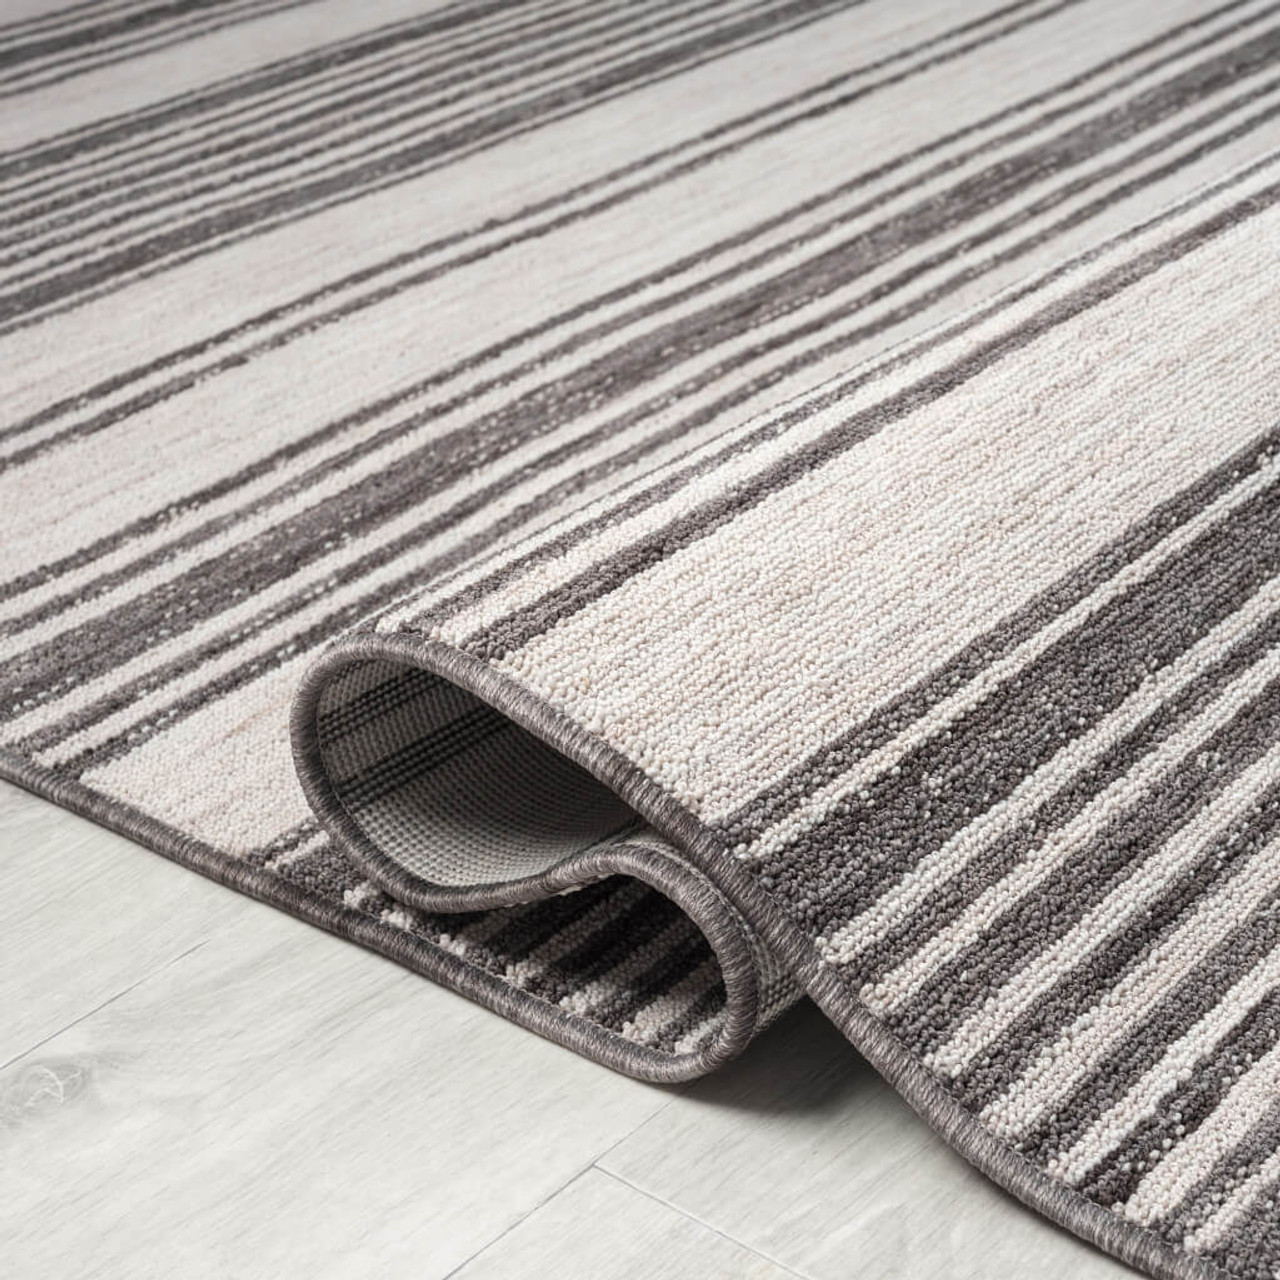 8' X 9' Gray And Ivory Striped Indoor Outdoor Area Rug